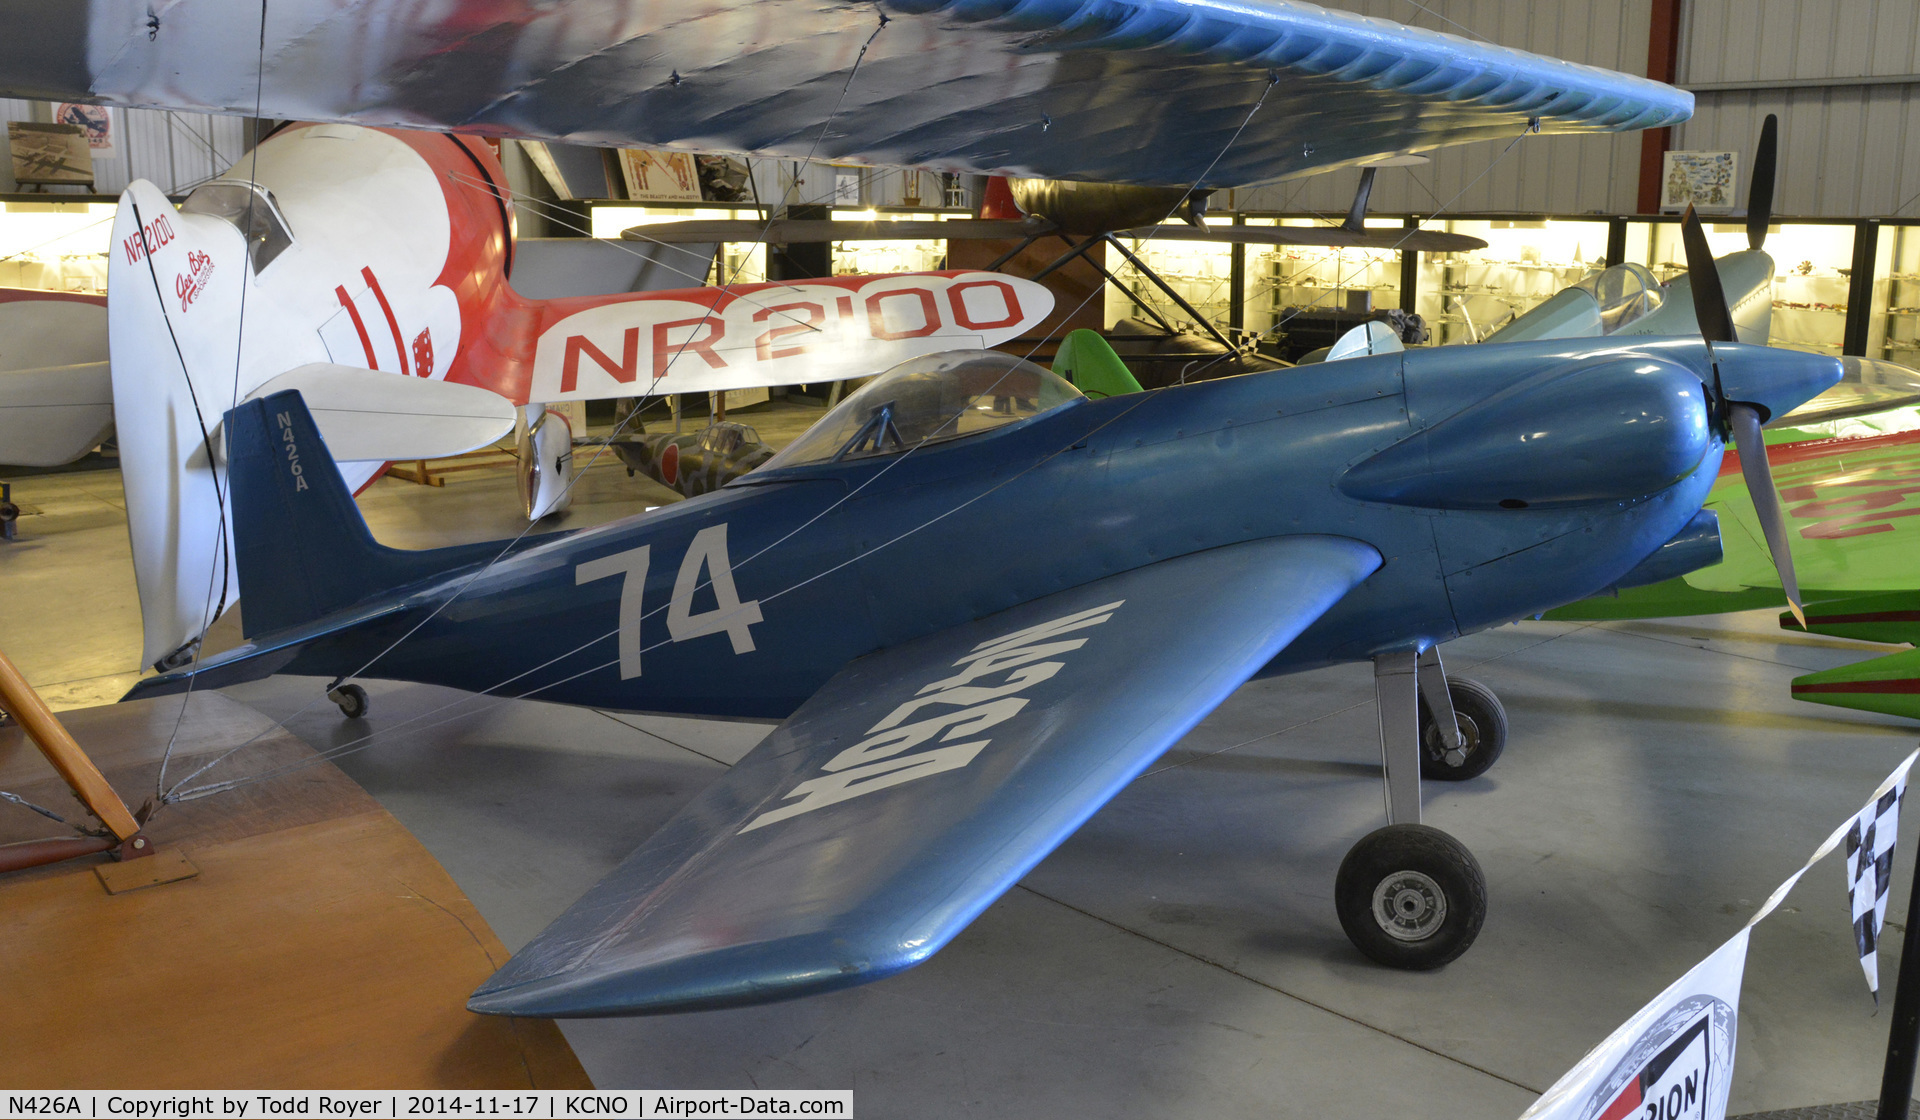 N426A, 1950 Orlowski Henri H O 1 C/N 1, On display at the Planes of Fame Chino location